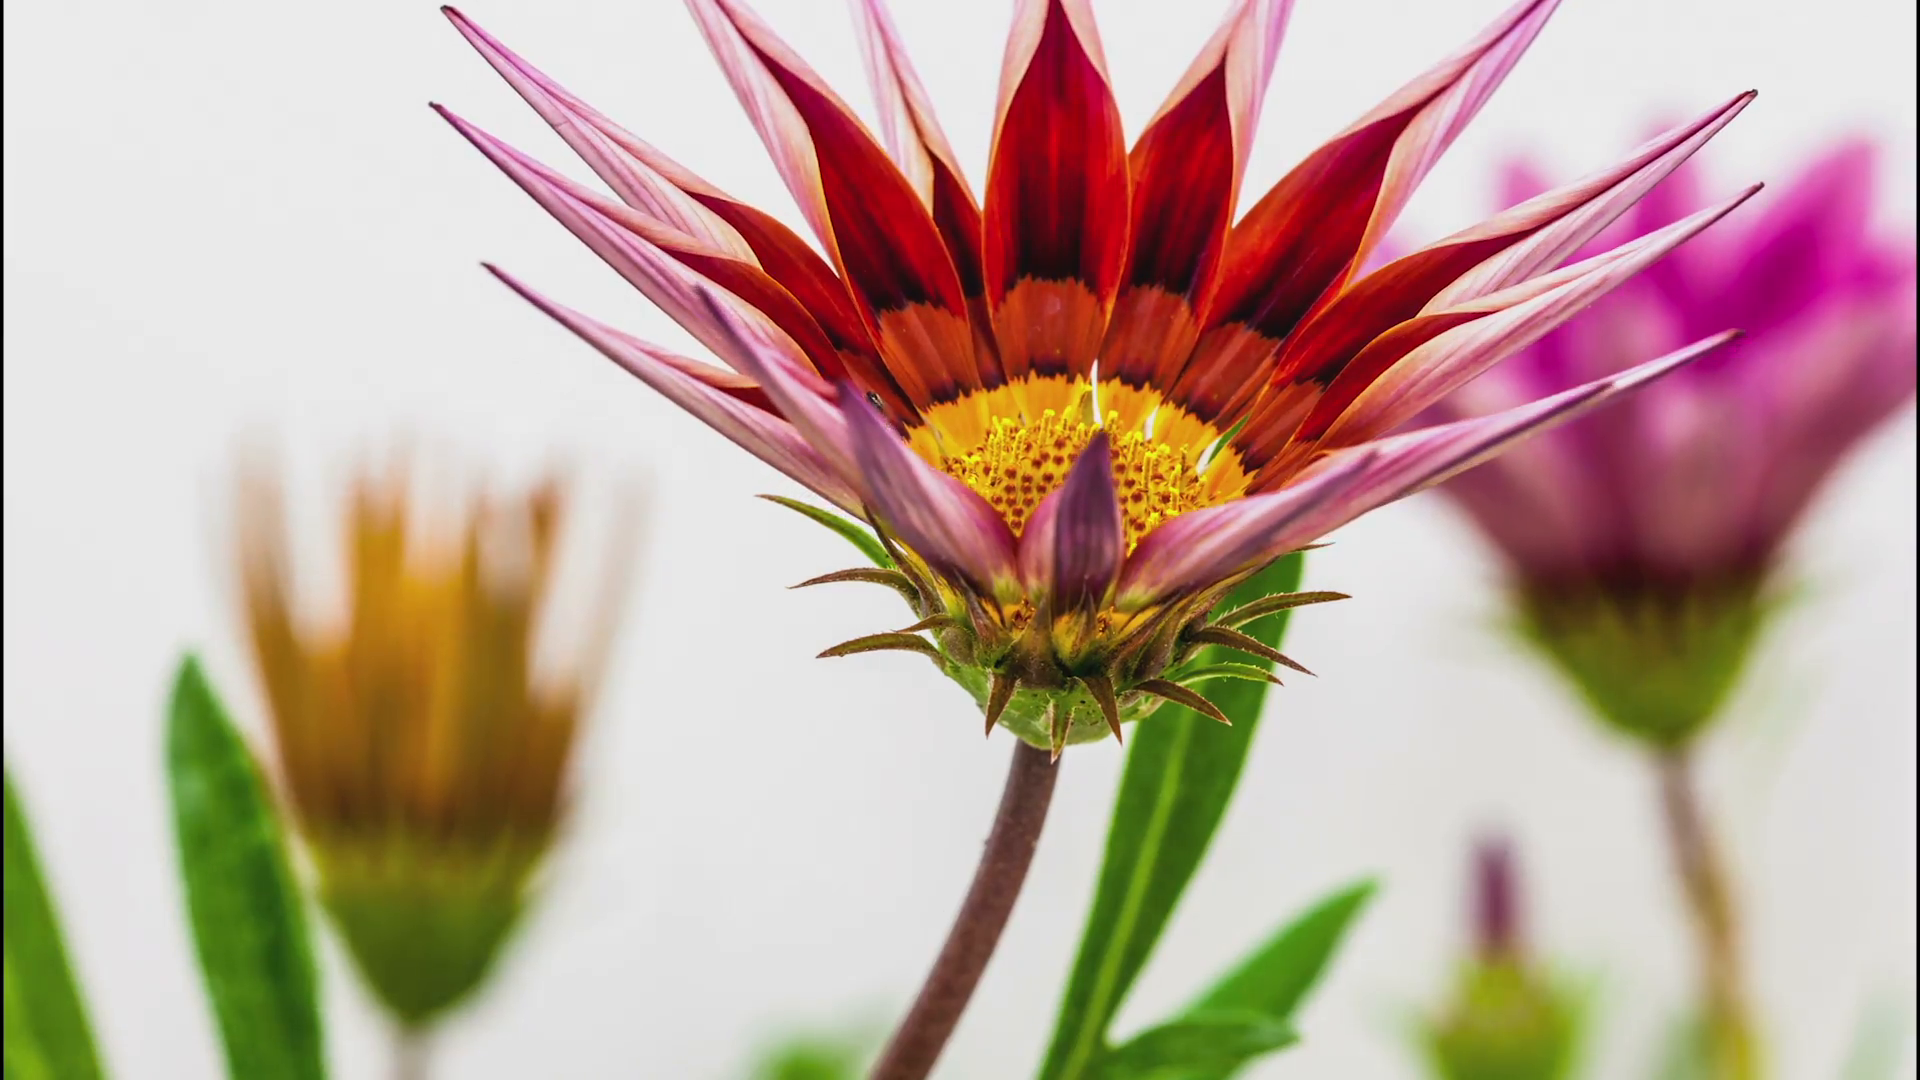 Timelapse video of a gazania flower growing on a white background ...